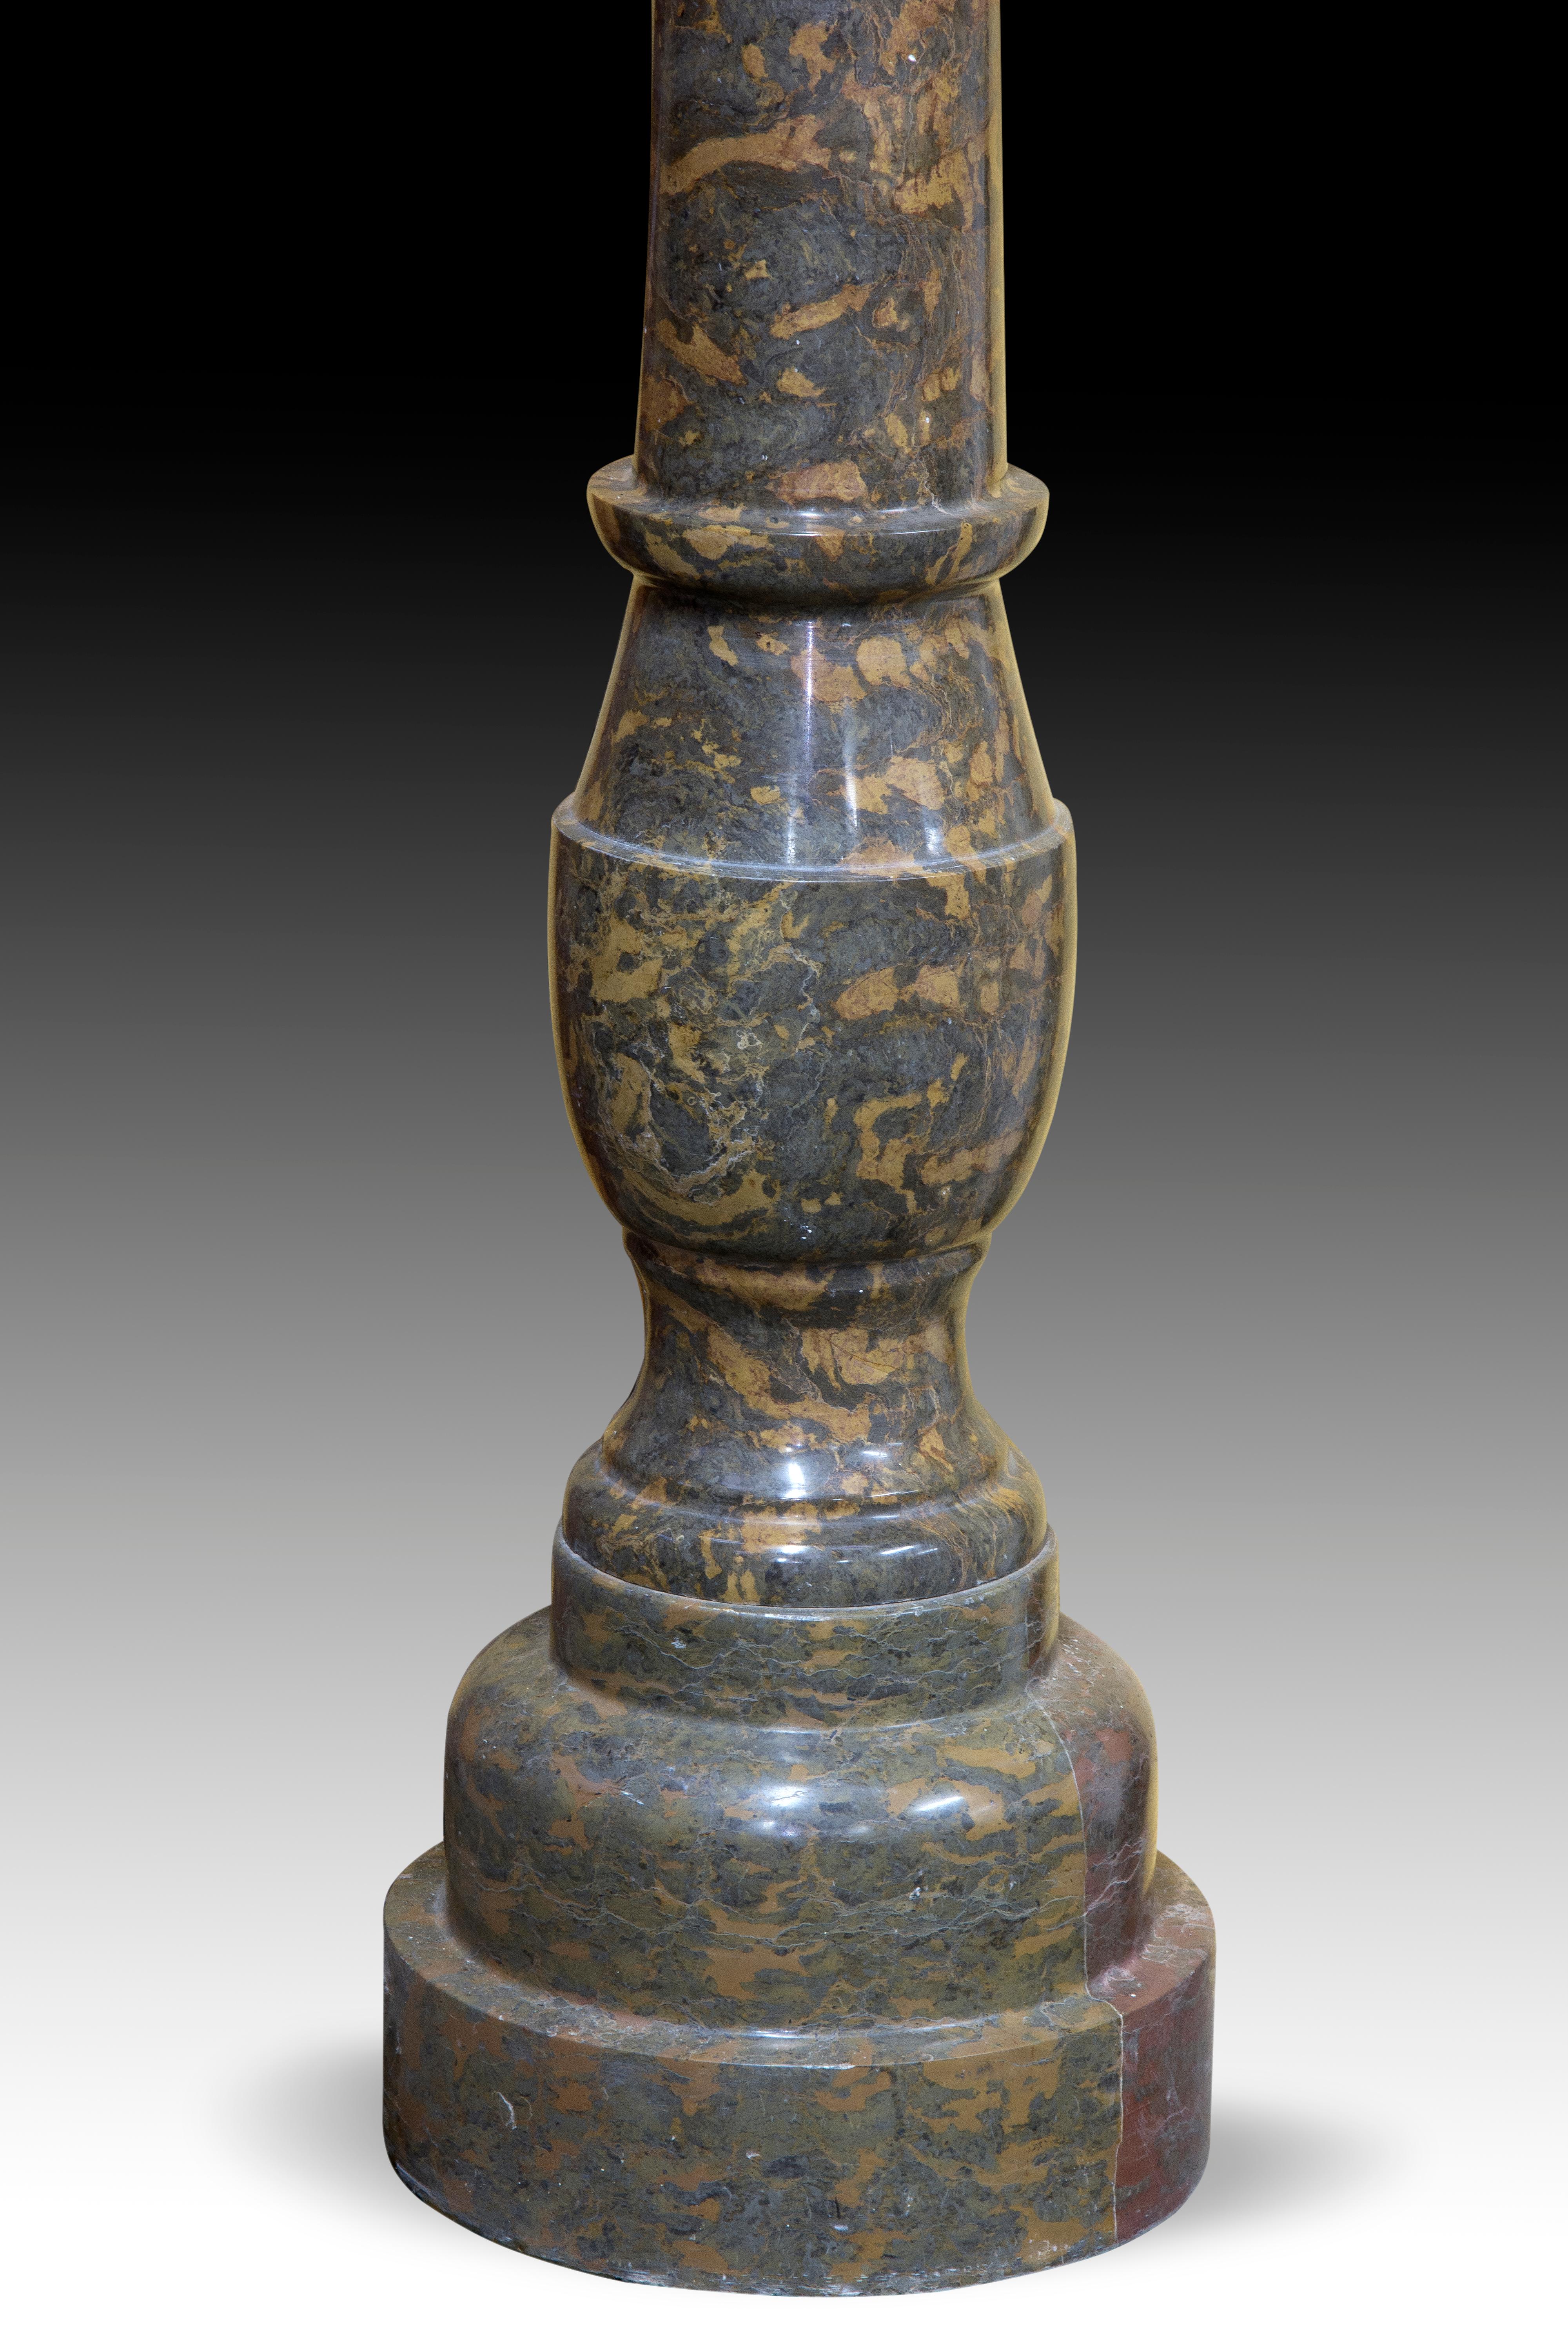 Both elements have been made using the same stone to provide uniformity to the work. The forceful base, the column, with a baluster, and the cup decorated with pronounced moldings respond to models related to Mannerism and Baroque. These types of